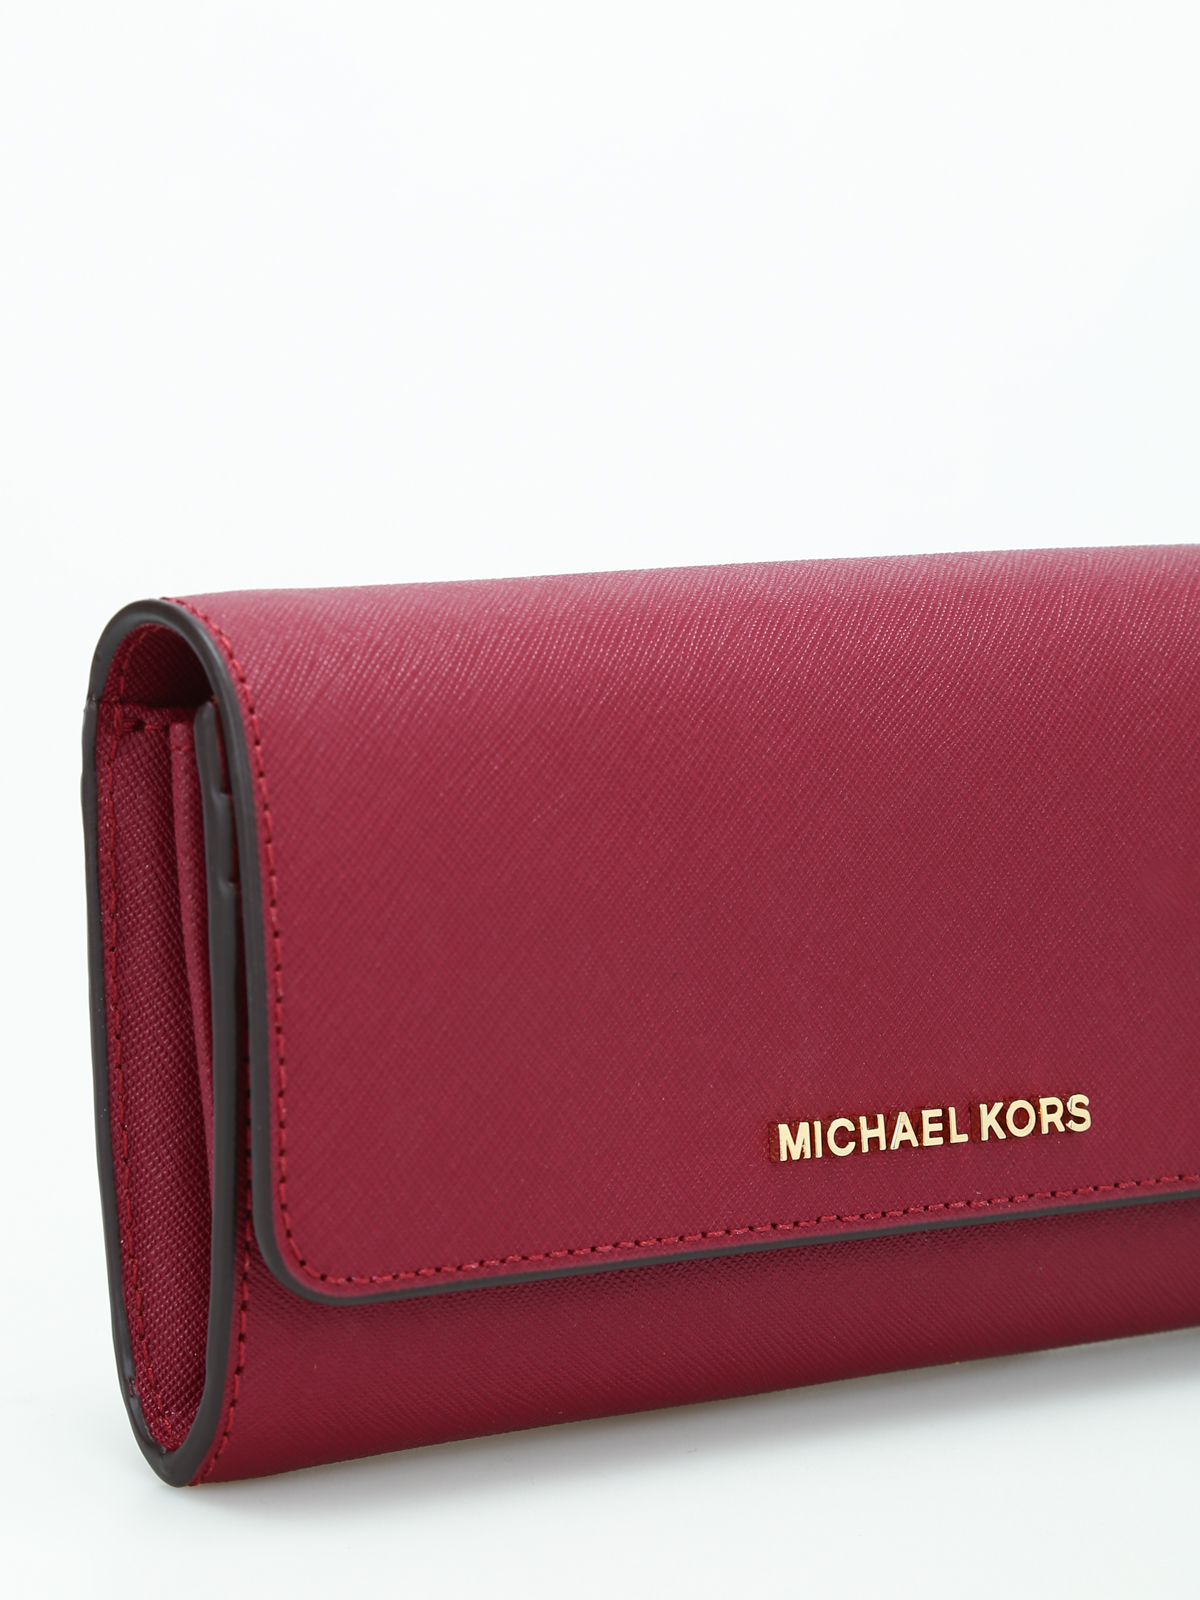 Michael Kors - Wallet on a chain saffiano clutch - clutches - 32F4GTVC9L666